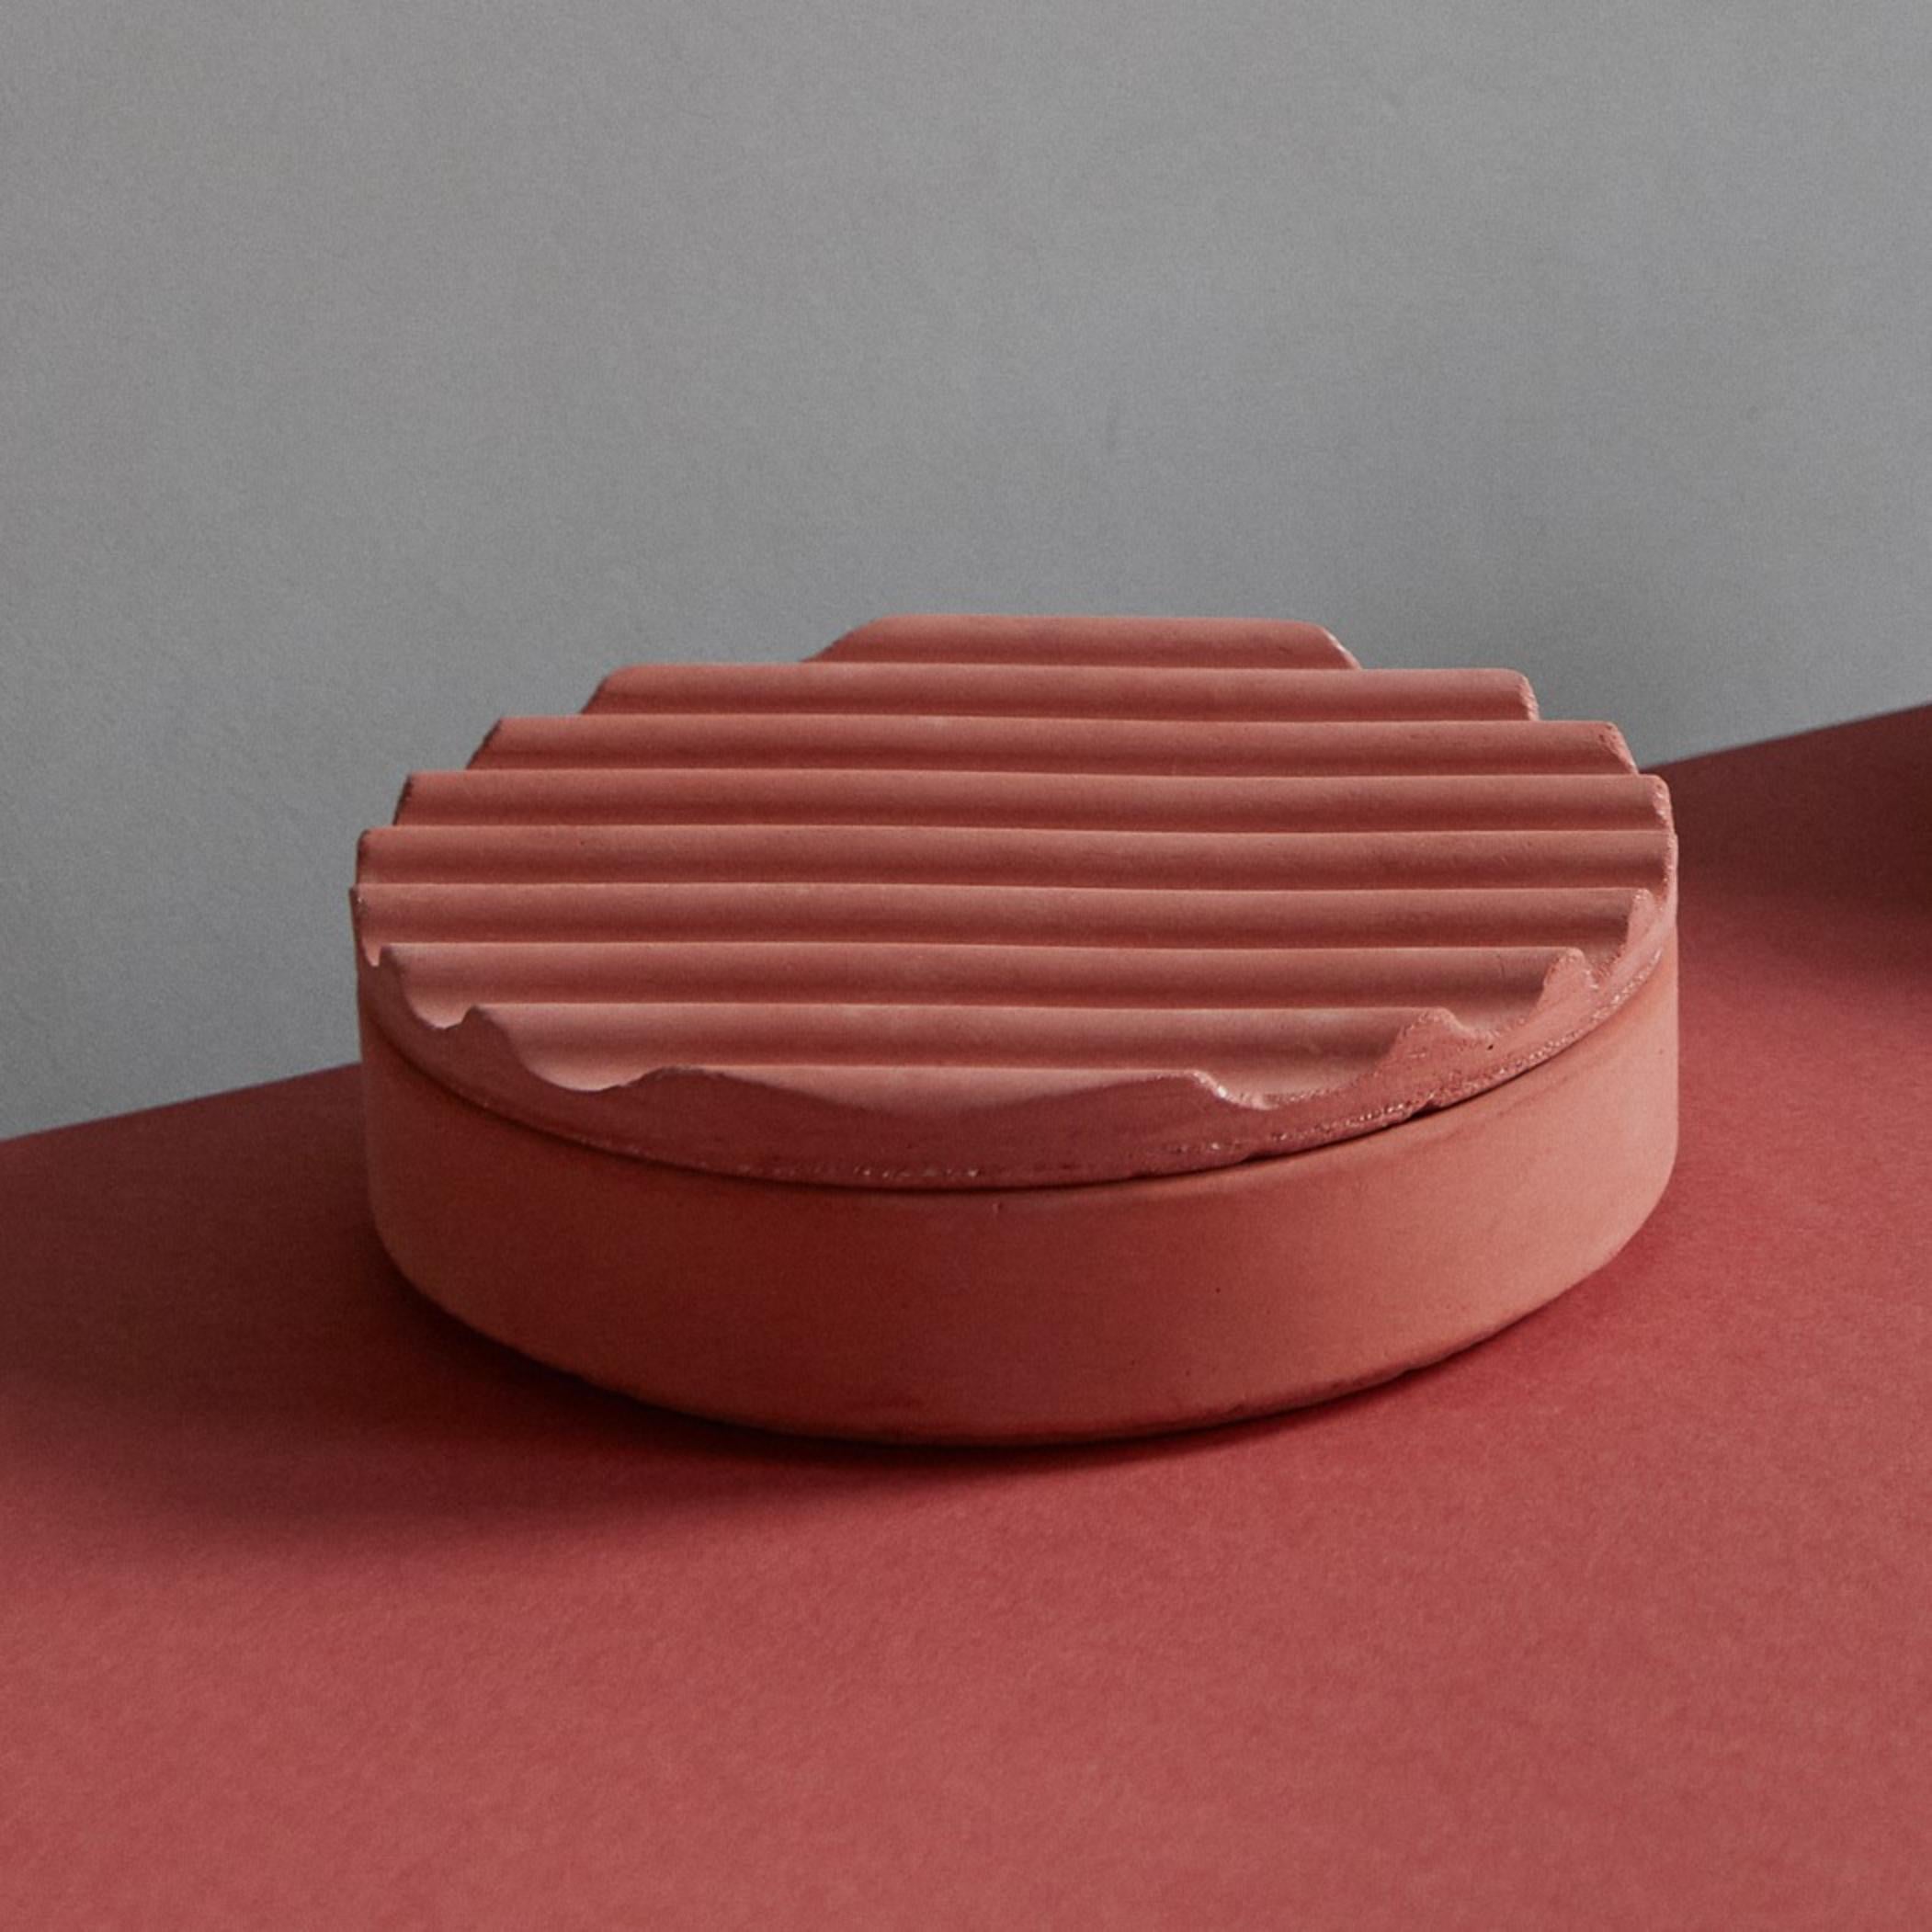 Ripple Vessel by Derya Arpac
Dimensions: D 17 x H 7 cm
Materials: pigmented concrete
Also available: other colours available,

Derya Arpac is a Copenhagen based architect and furniture designer.
She holds a Master of Arts in Architecture and